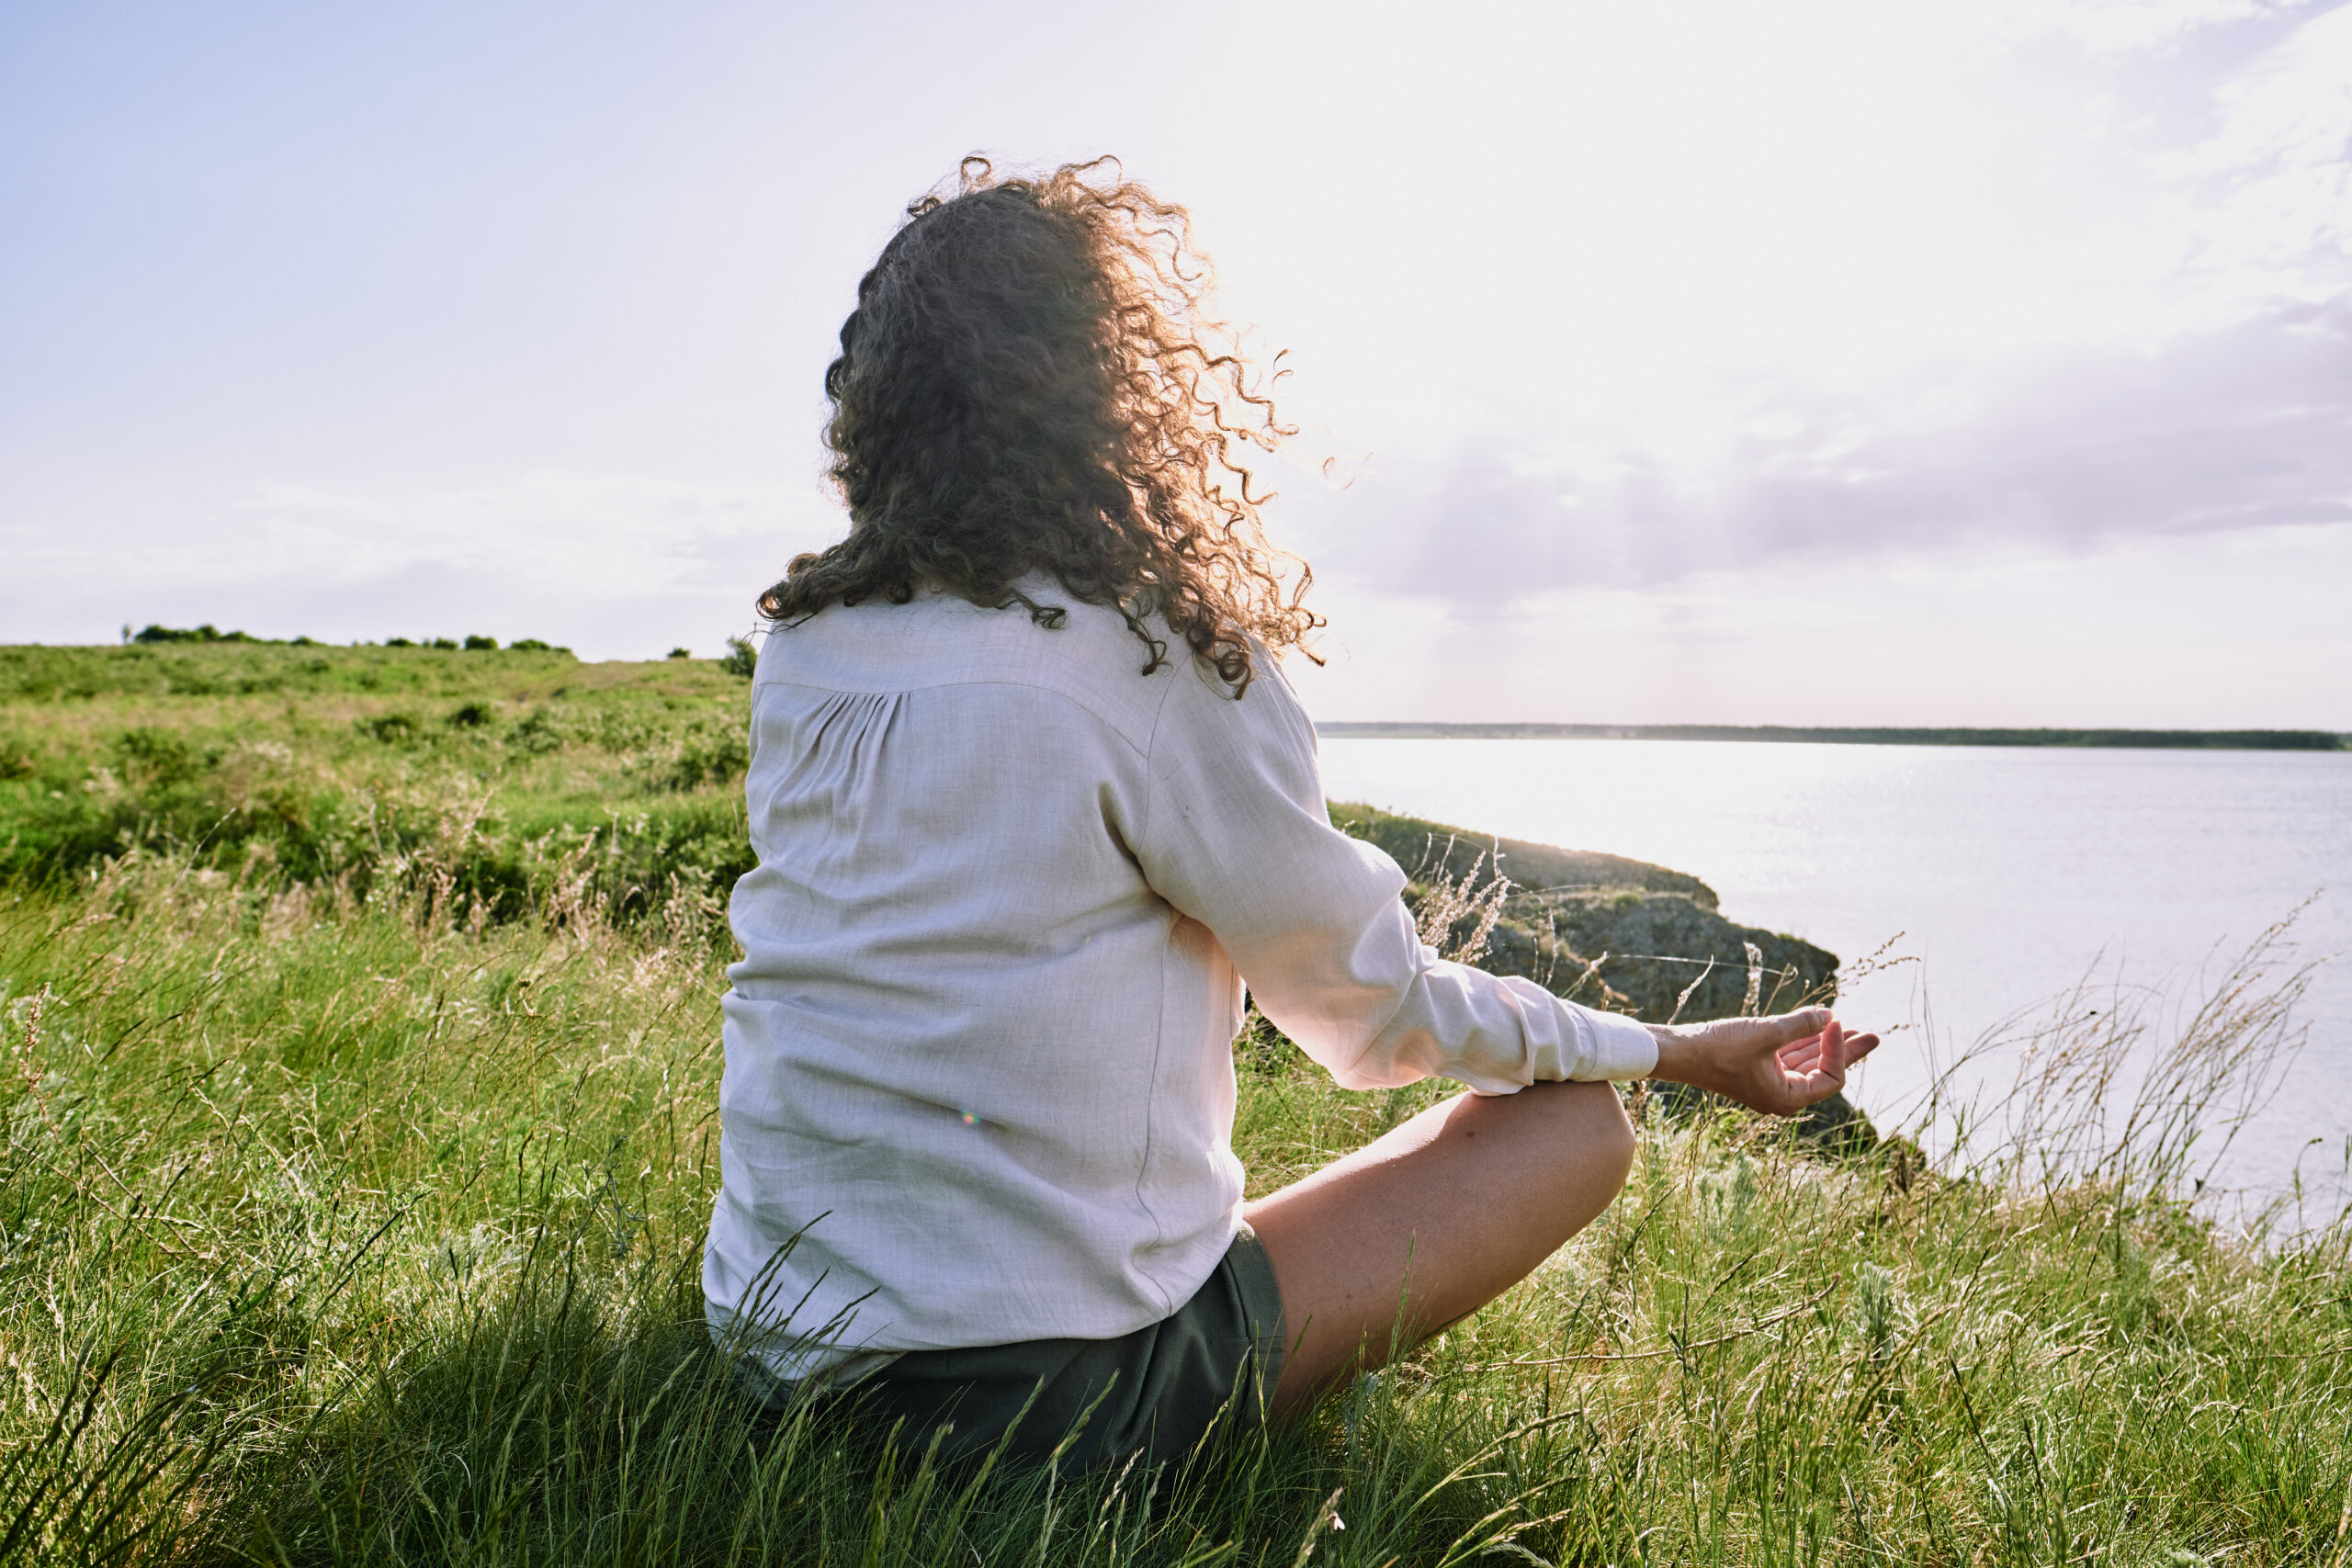 Rear view of curly-haired woman sitting with crossed legs on grass and meditating in silence by tranquil lake - trauma triggers